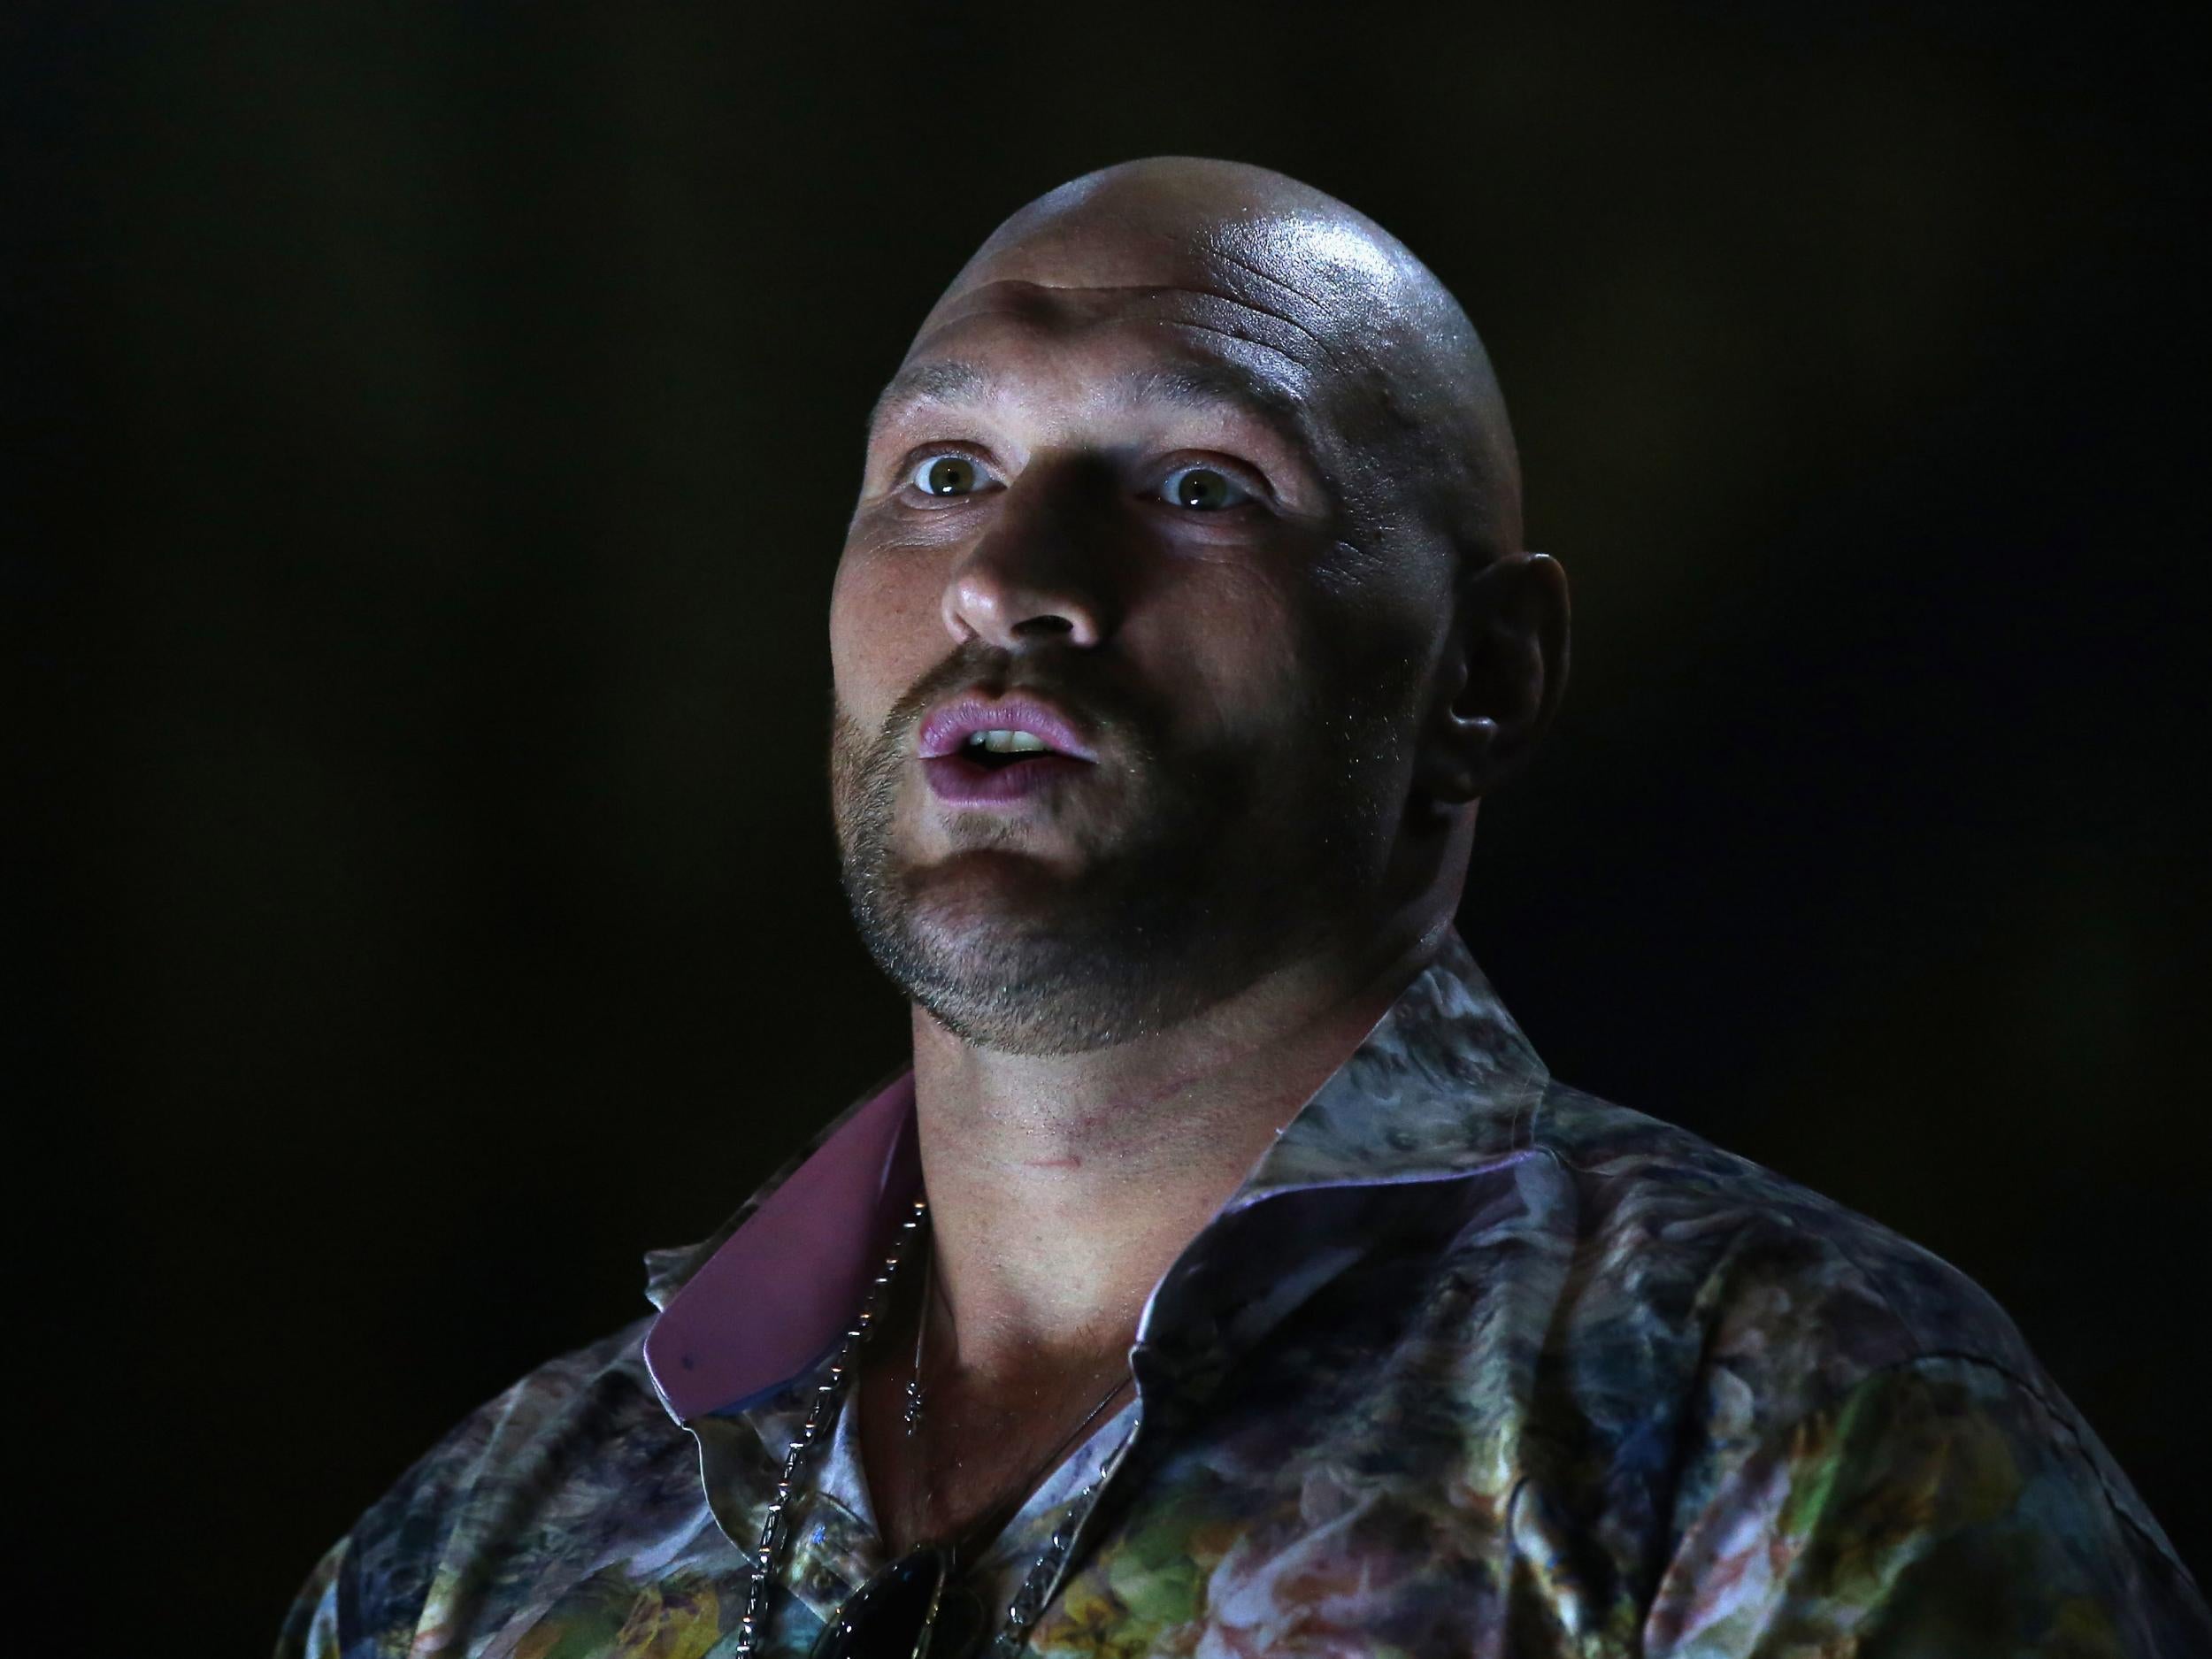 Fury will make his return from more than two years away next month